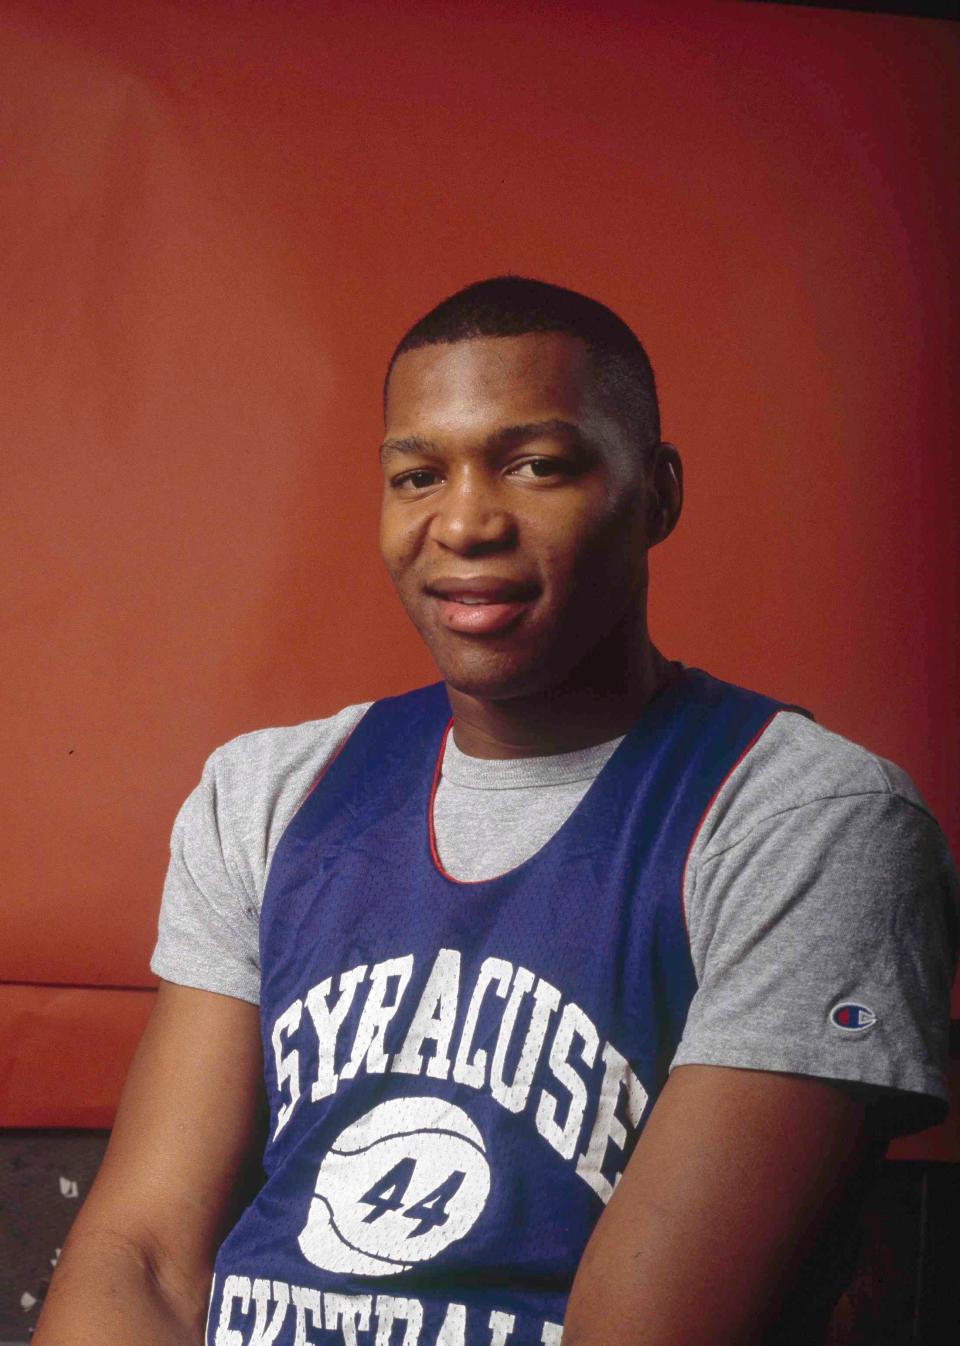 Derrick Coleman, as he was photographed in 1990 as a member of the Syracuse University basketball team. Before enrolling at Syracuse, Coleman was a standout player at Detroit Northern High School and played in the 1986 McDonald's All-American Game at Joe Louis Arena.